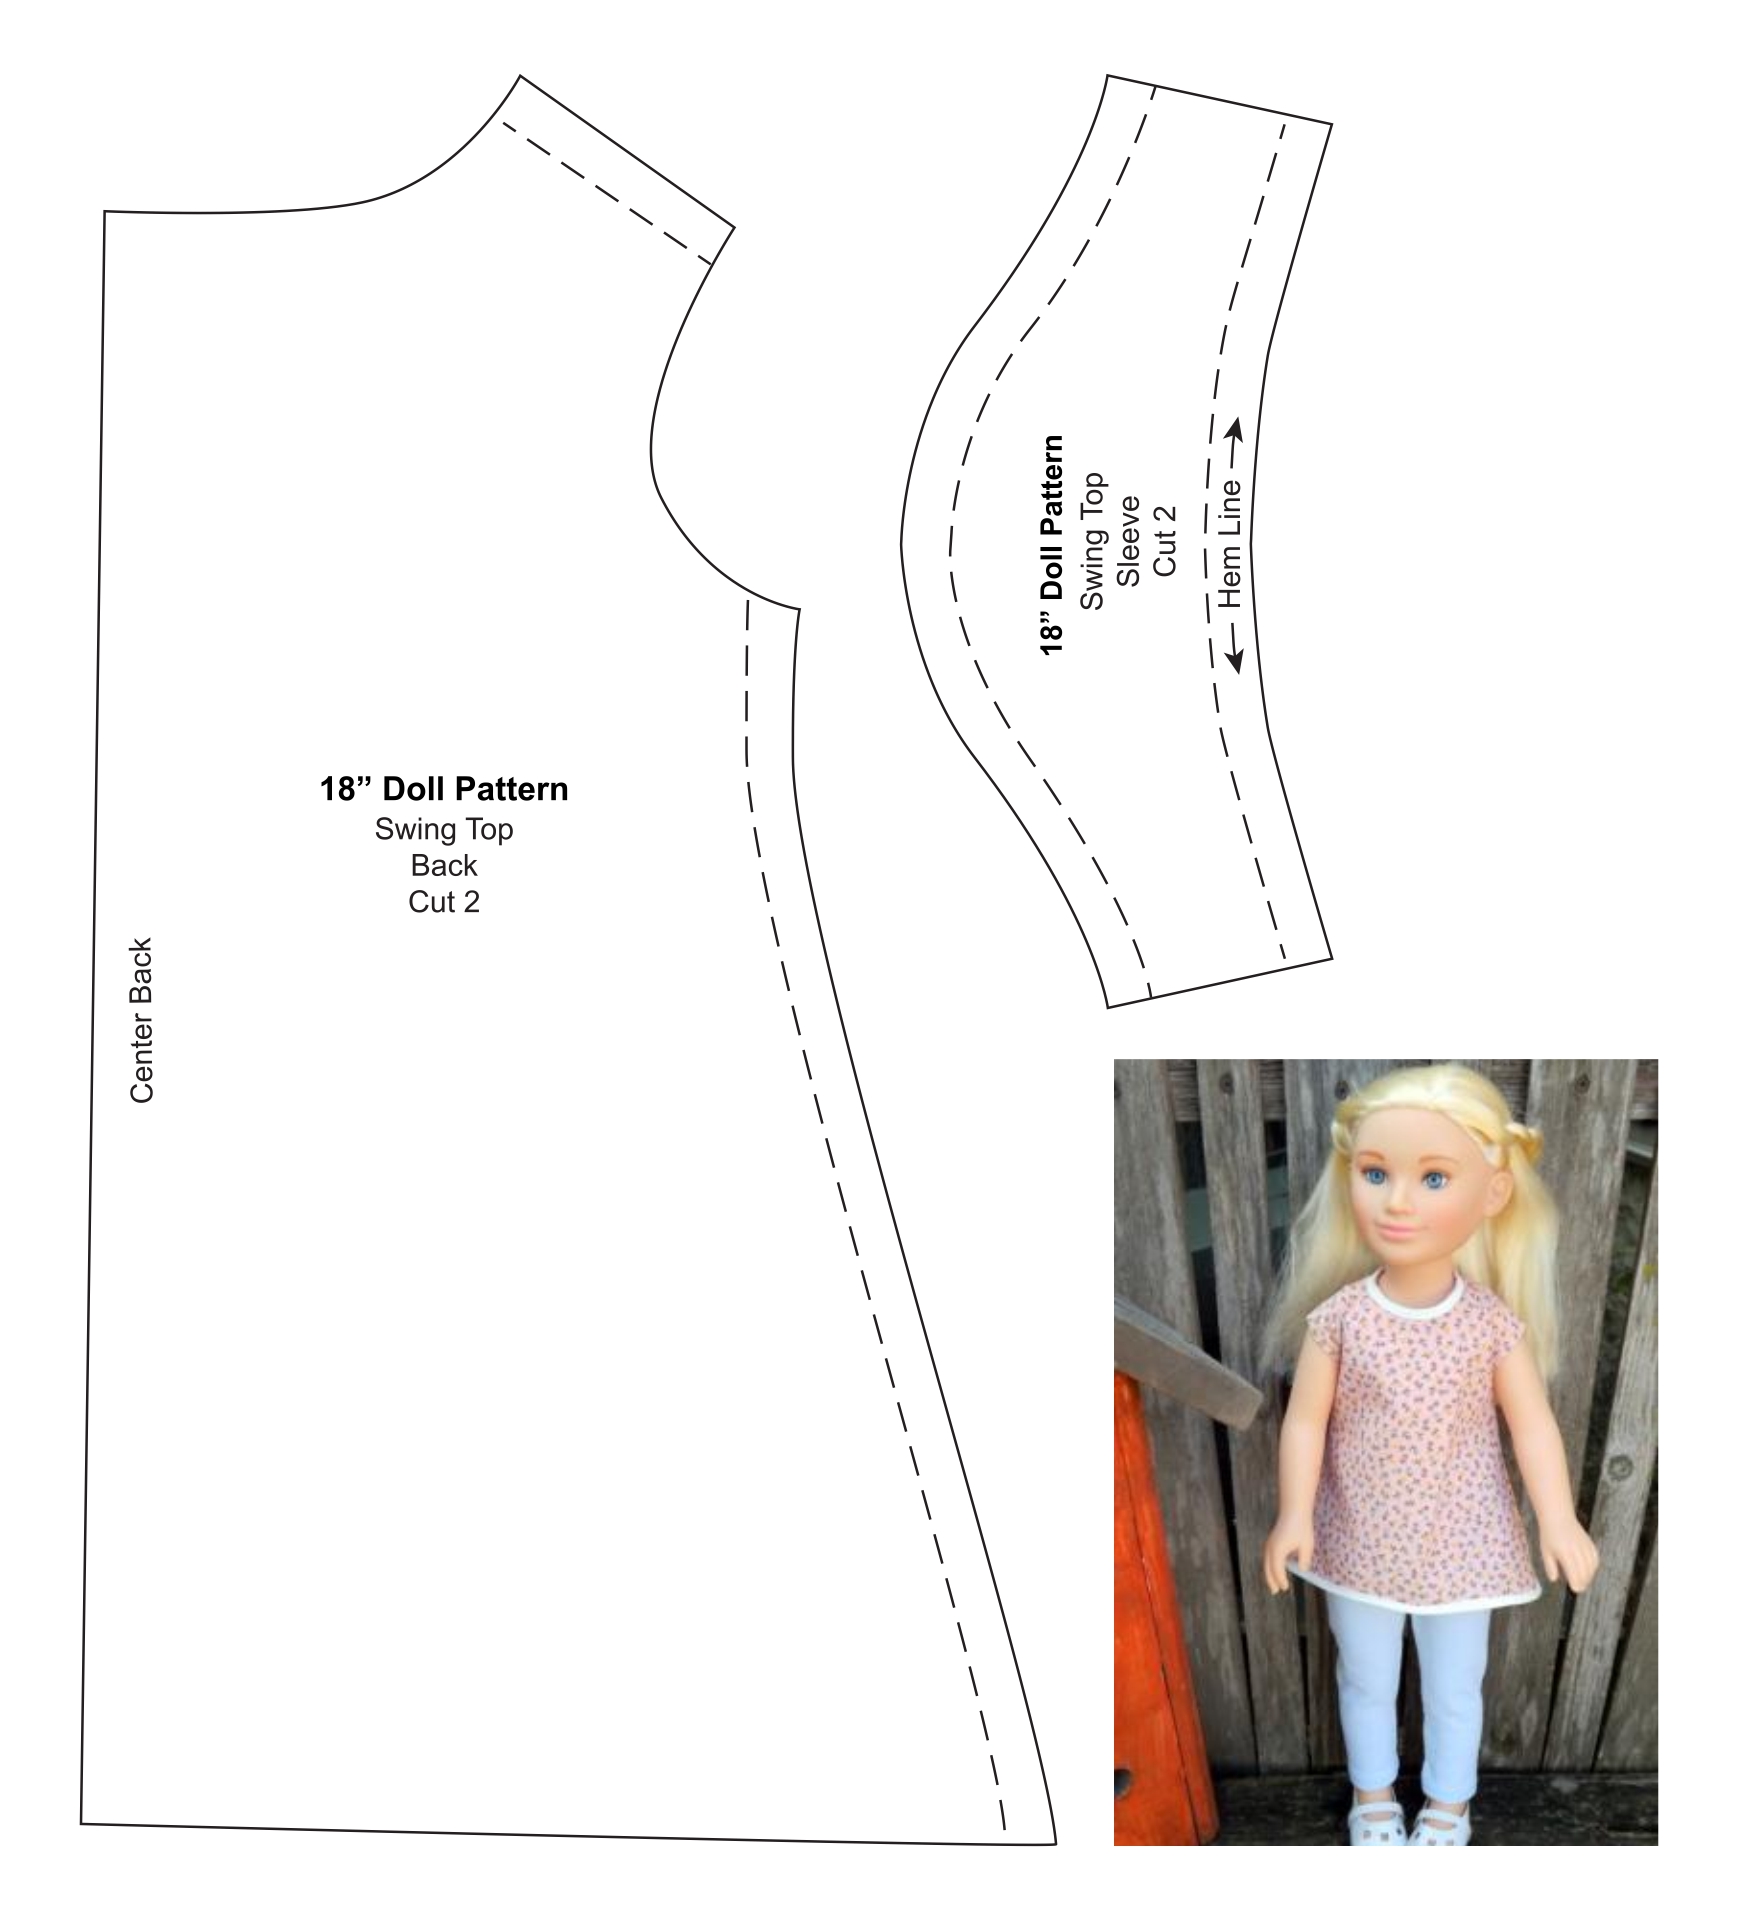 54-free-printable-doll-clothes-patterns-for-12-inch-dolls-sohaibkingsley